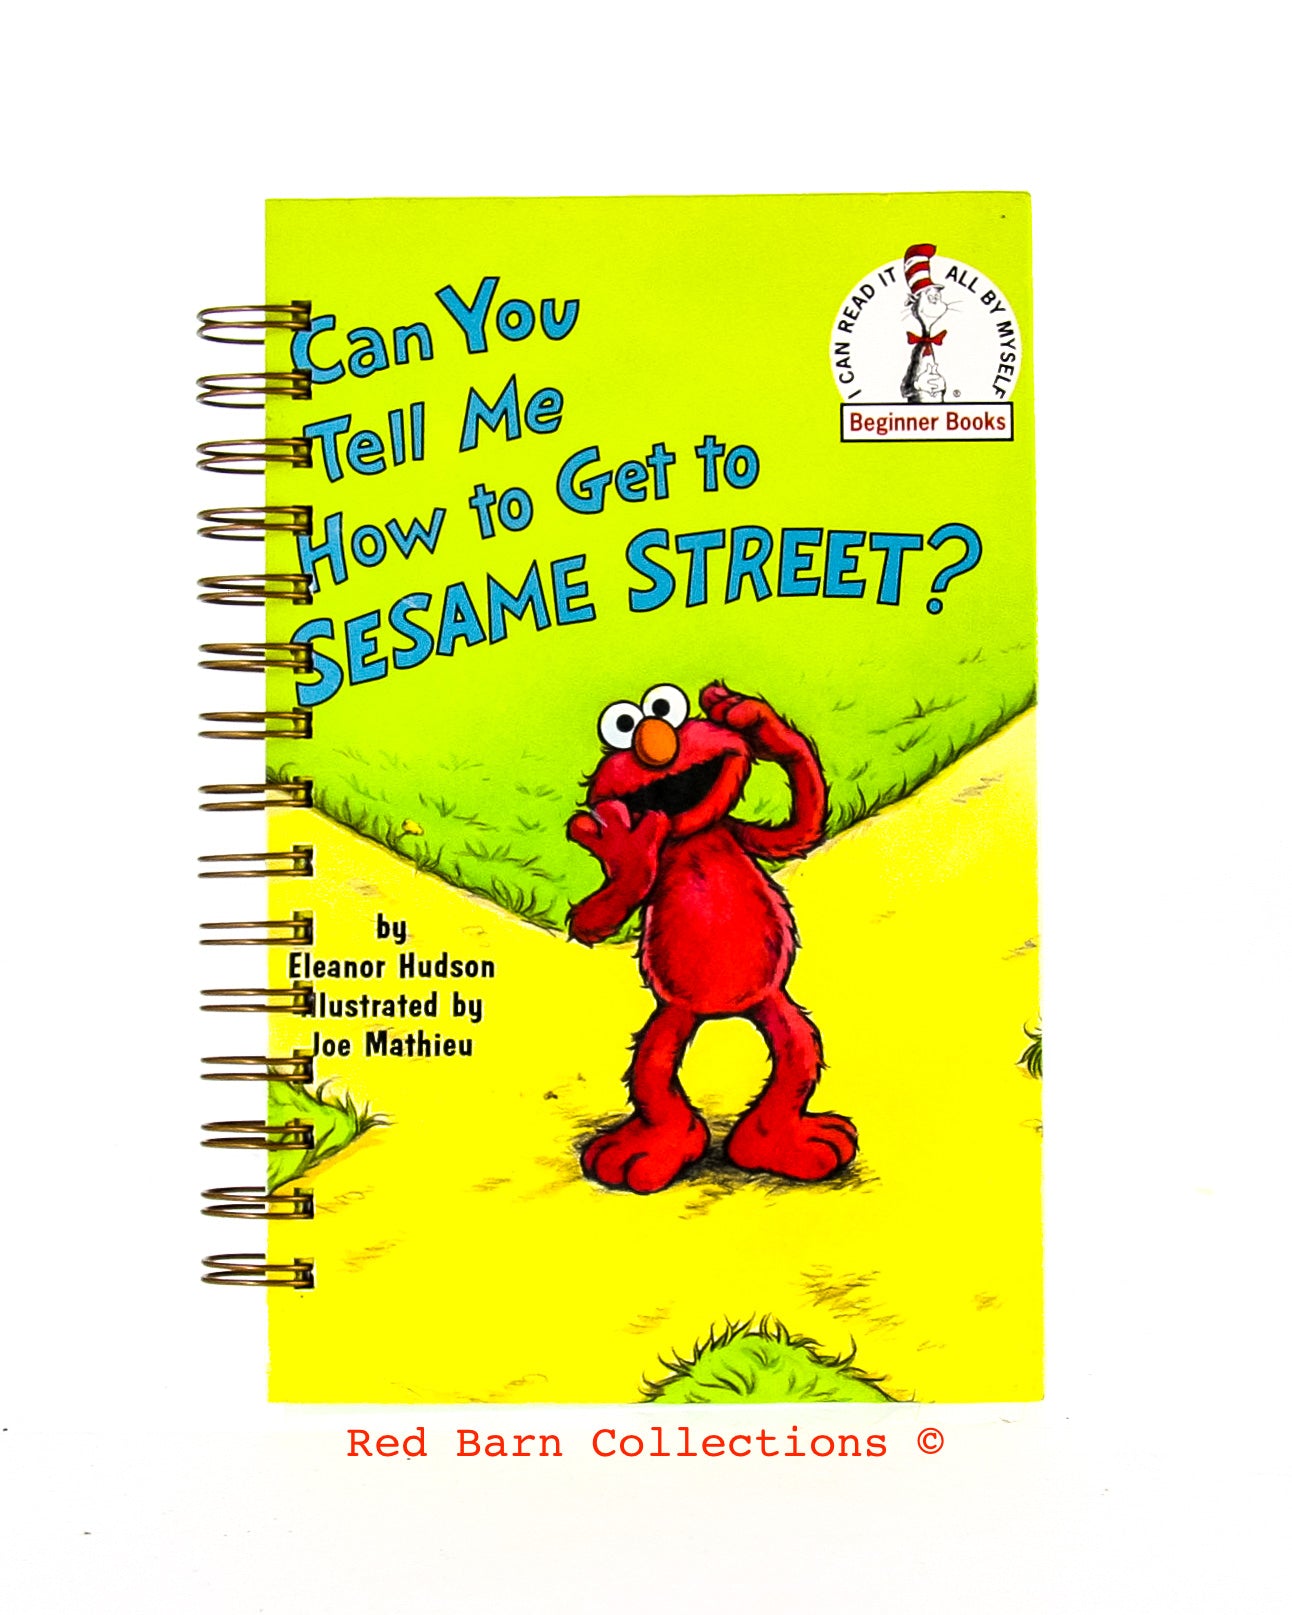 Can You Tell Me How to Get to Sesame Street?-Red Barn Collections